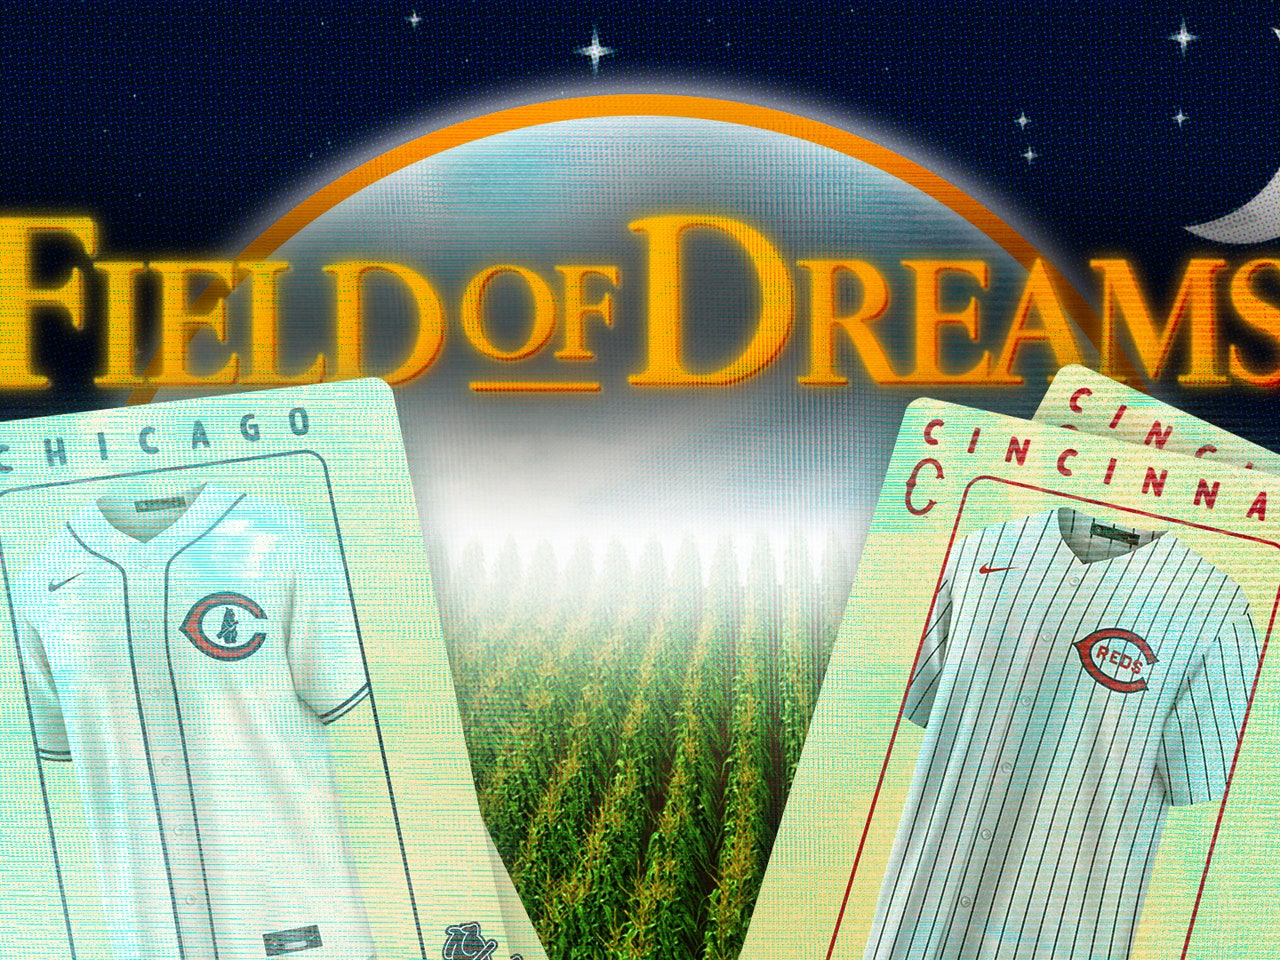 Cubs, Reds unveil throwback uniforms for Field of Dreams game